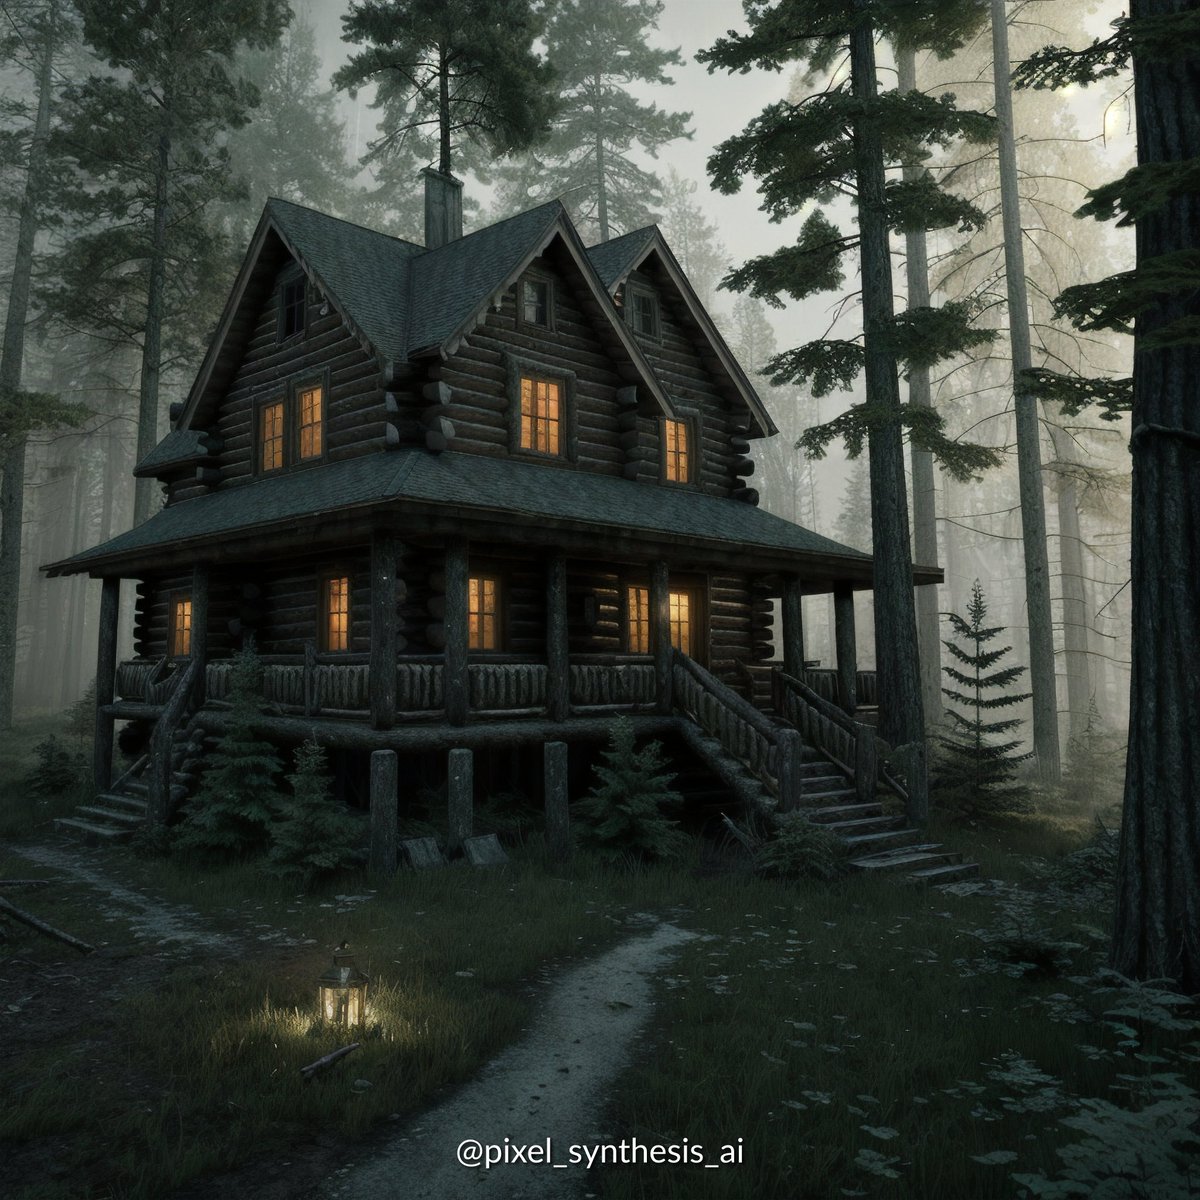 Explore the eerie 'Whispers of the Woods' in this haunting depiction of a cabin, created by AI🌲👻🌿.

#aiart #aigeneratedart #stablediffusionart #sdxl #huggingface #openai #chatgpt #civitai #airender #digitalart #masterpiece #aiimage #aiimagery #woodhouse #cabininthewoods #house